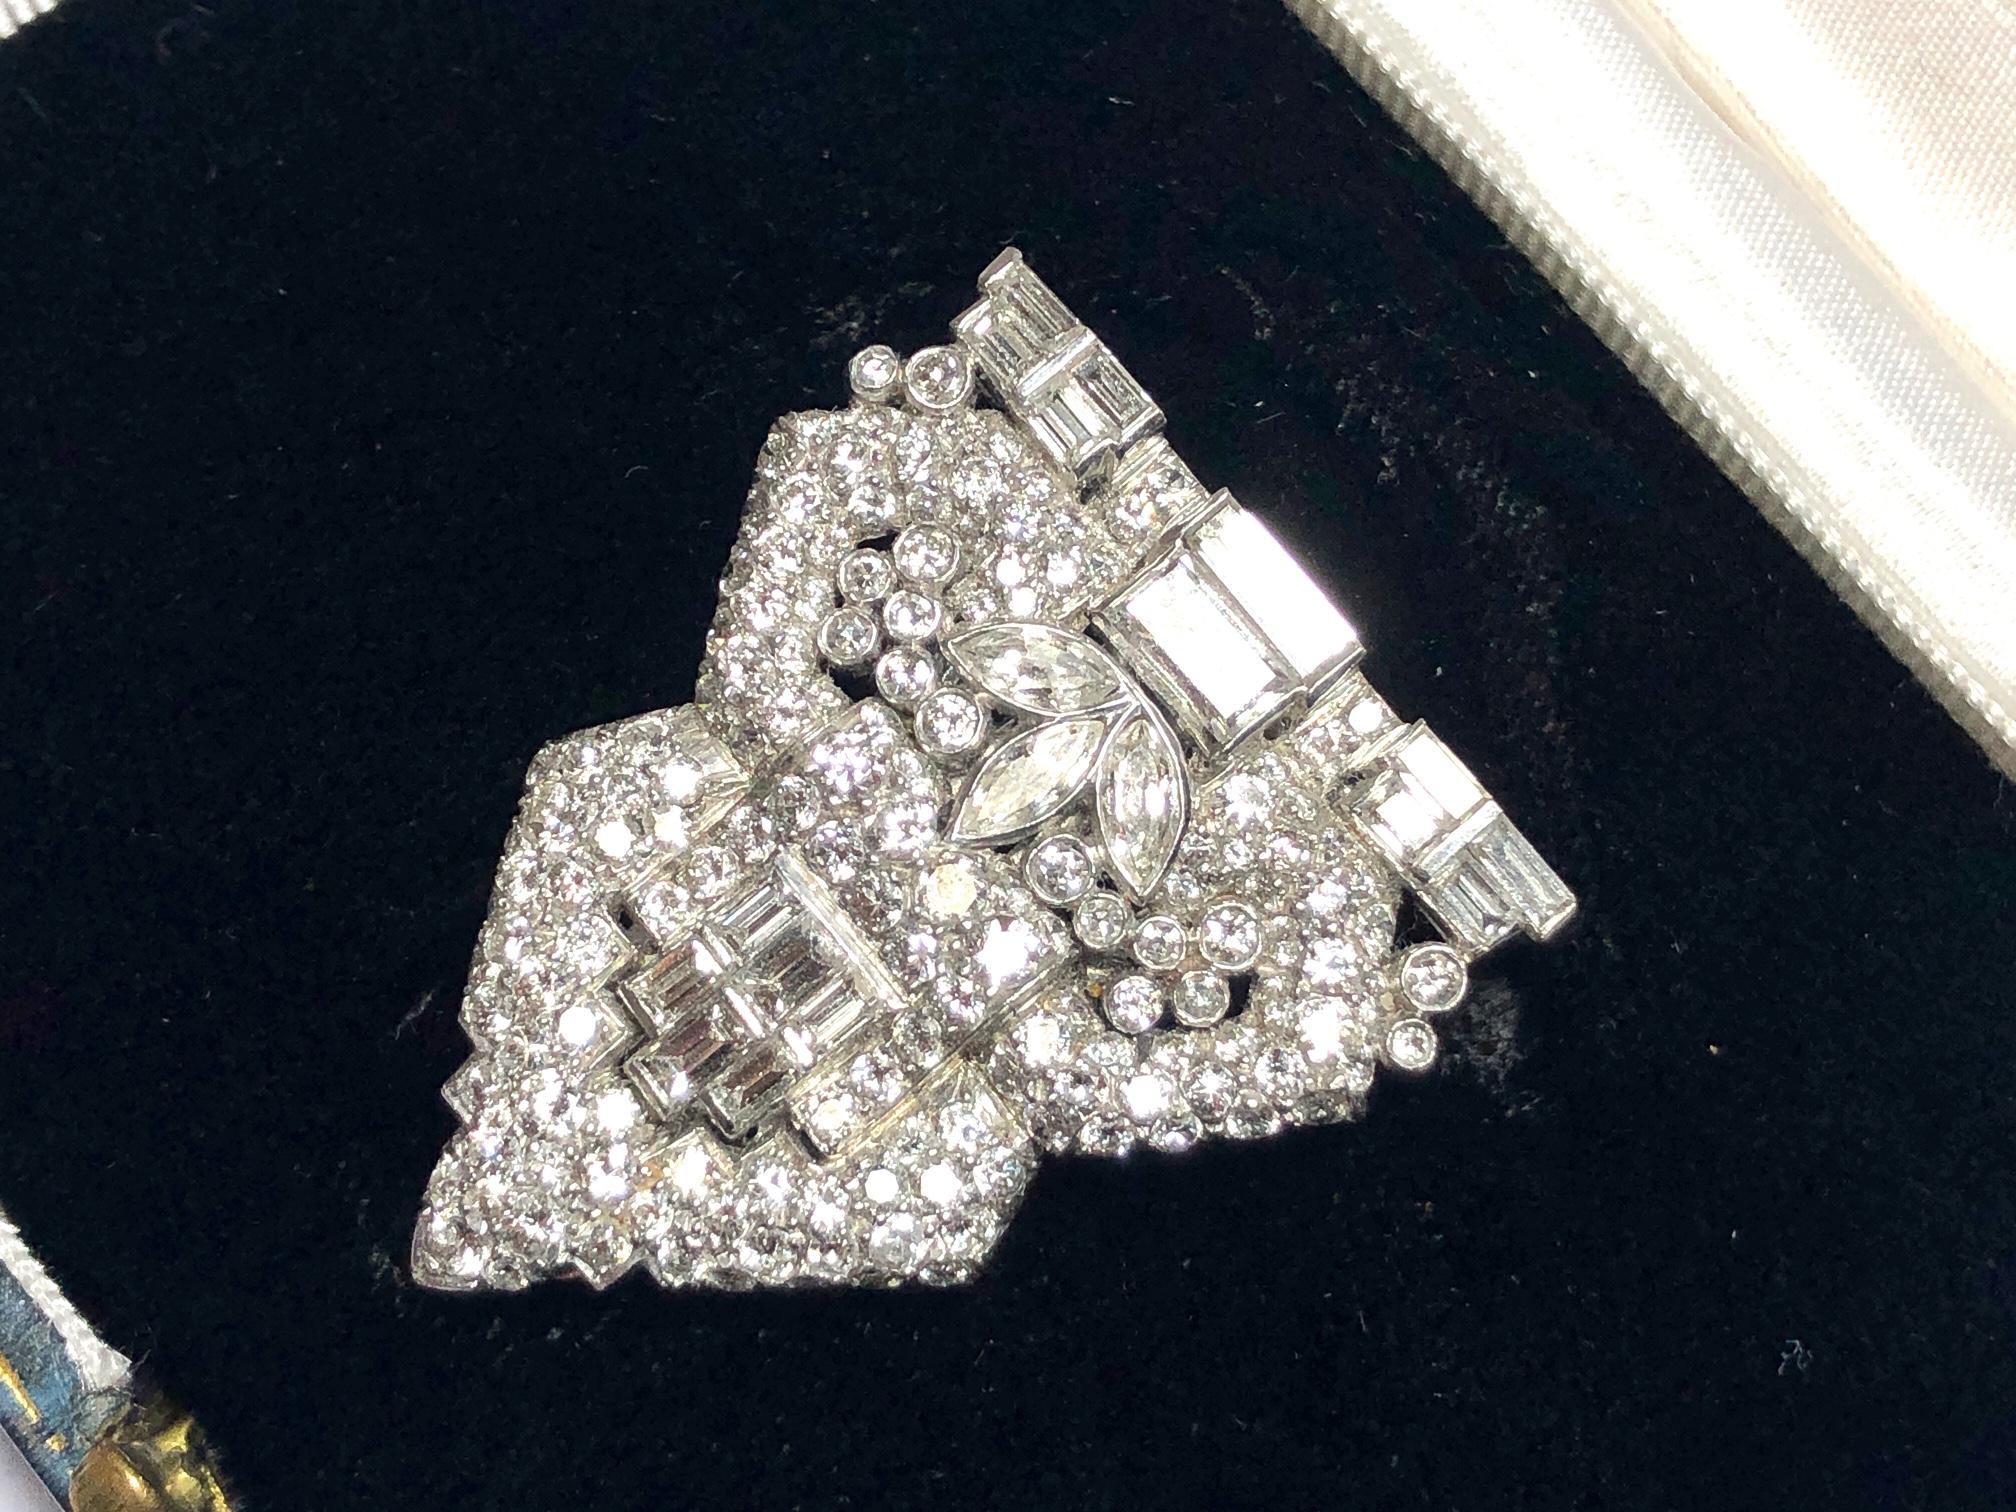 An Art Deco, shield shape, diamond single clip, set with baguette, marquise and round brilliant-cut diamonds, with an estimated total weight of 3.00ct, mounted in platinum, with and 18ct white gold clip, circa 1935.